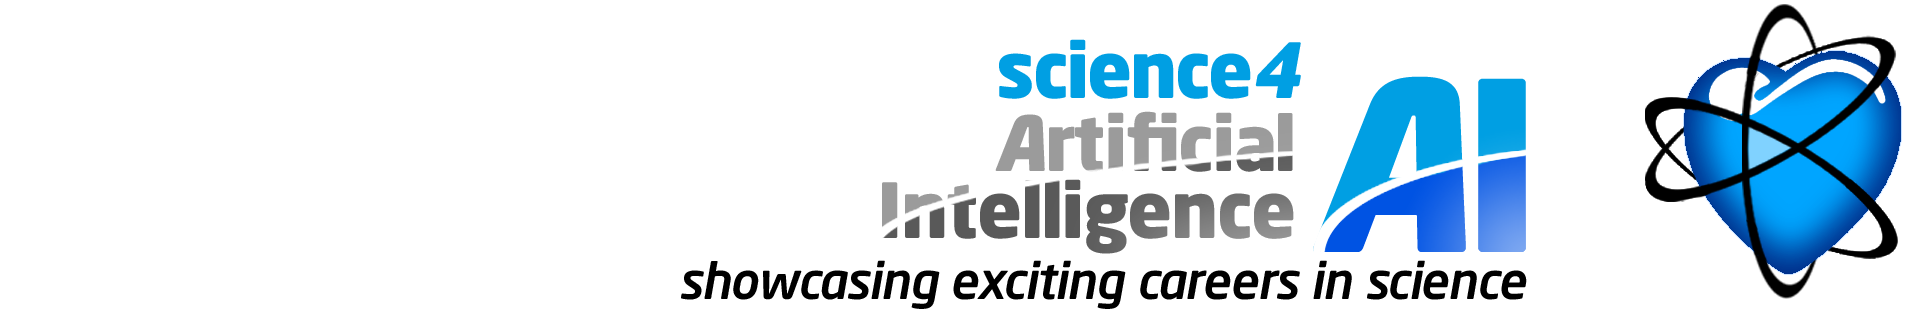 Science for Artificial Intelligence - showcasing exciting careers in science